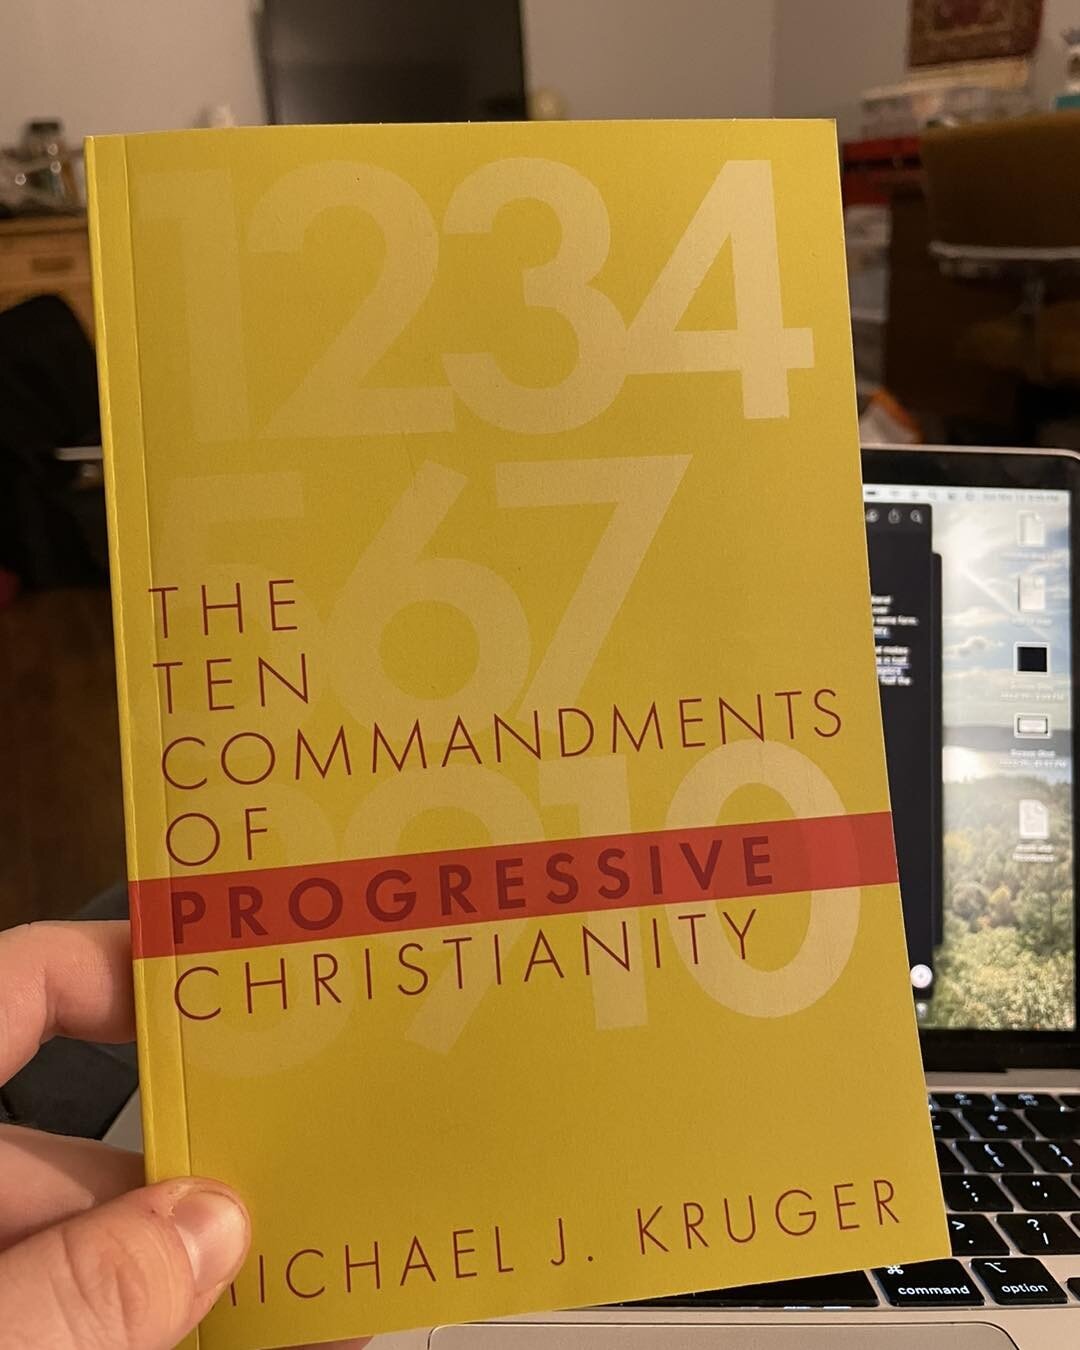 This past summer, we studies common false teachings and heresies that often go unnoticed. This 53 page booklet would be a great read for anyone. For those who were a part of our summer series, this book expands on much of what we discussed. Michael J